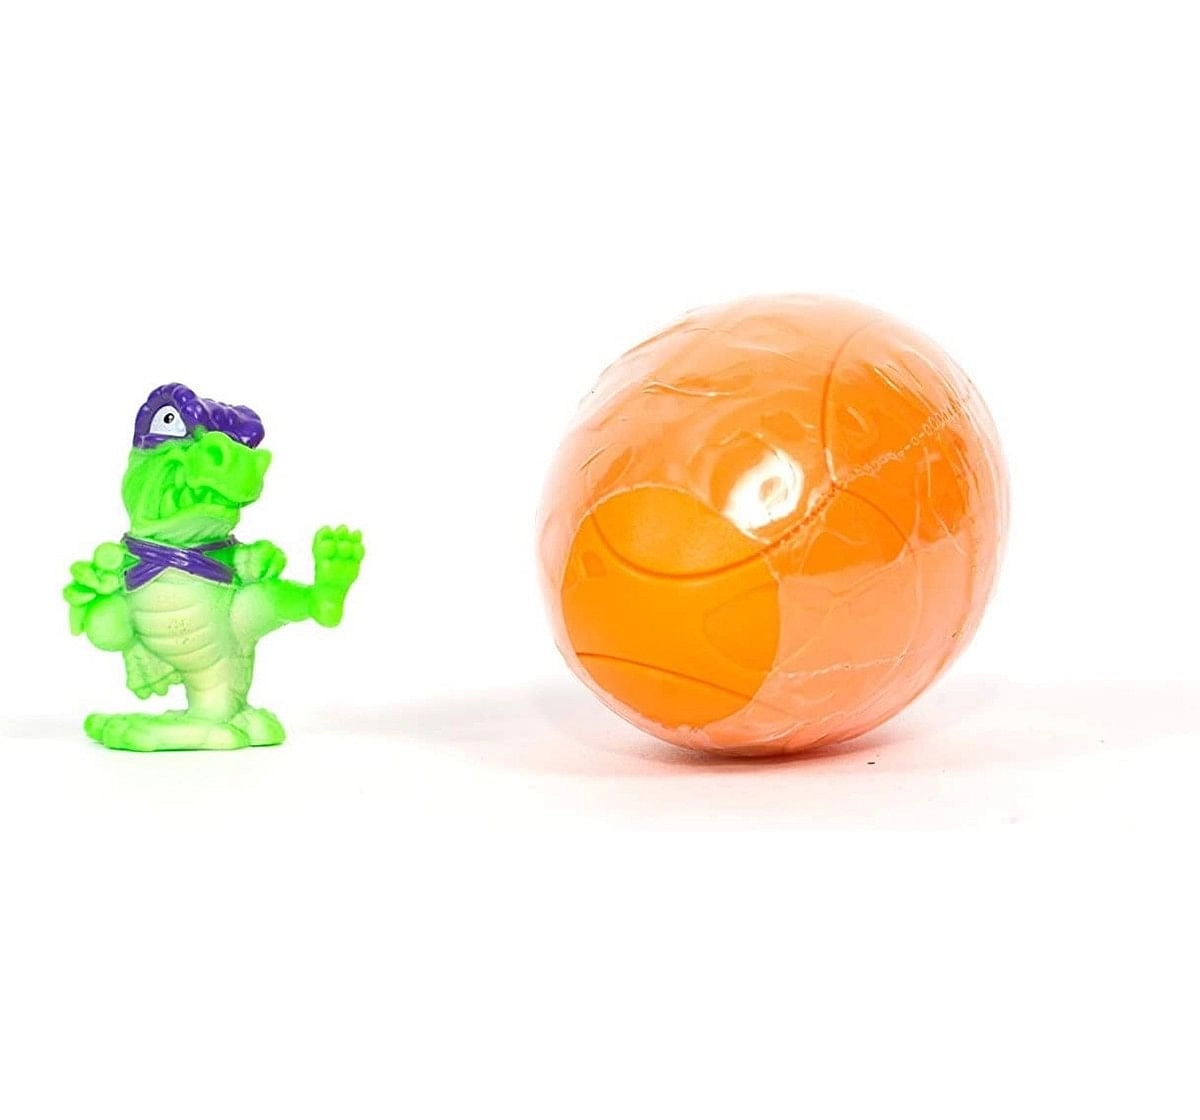 Smashers 7438 Series 3 Toy, One Size Novelty for Kids age 4Y+ (Orange)